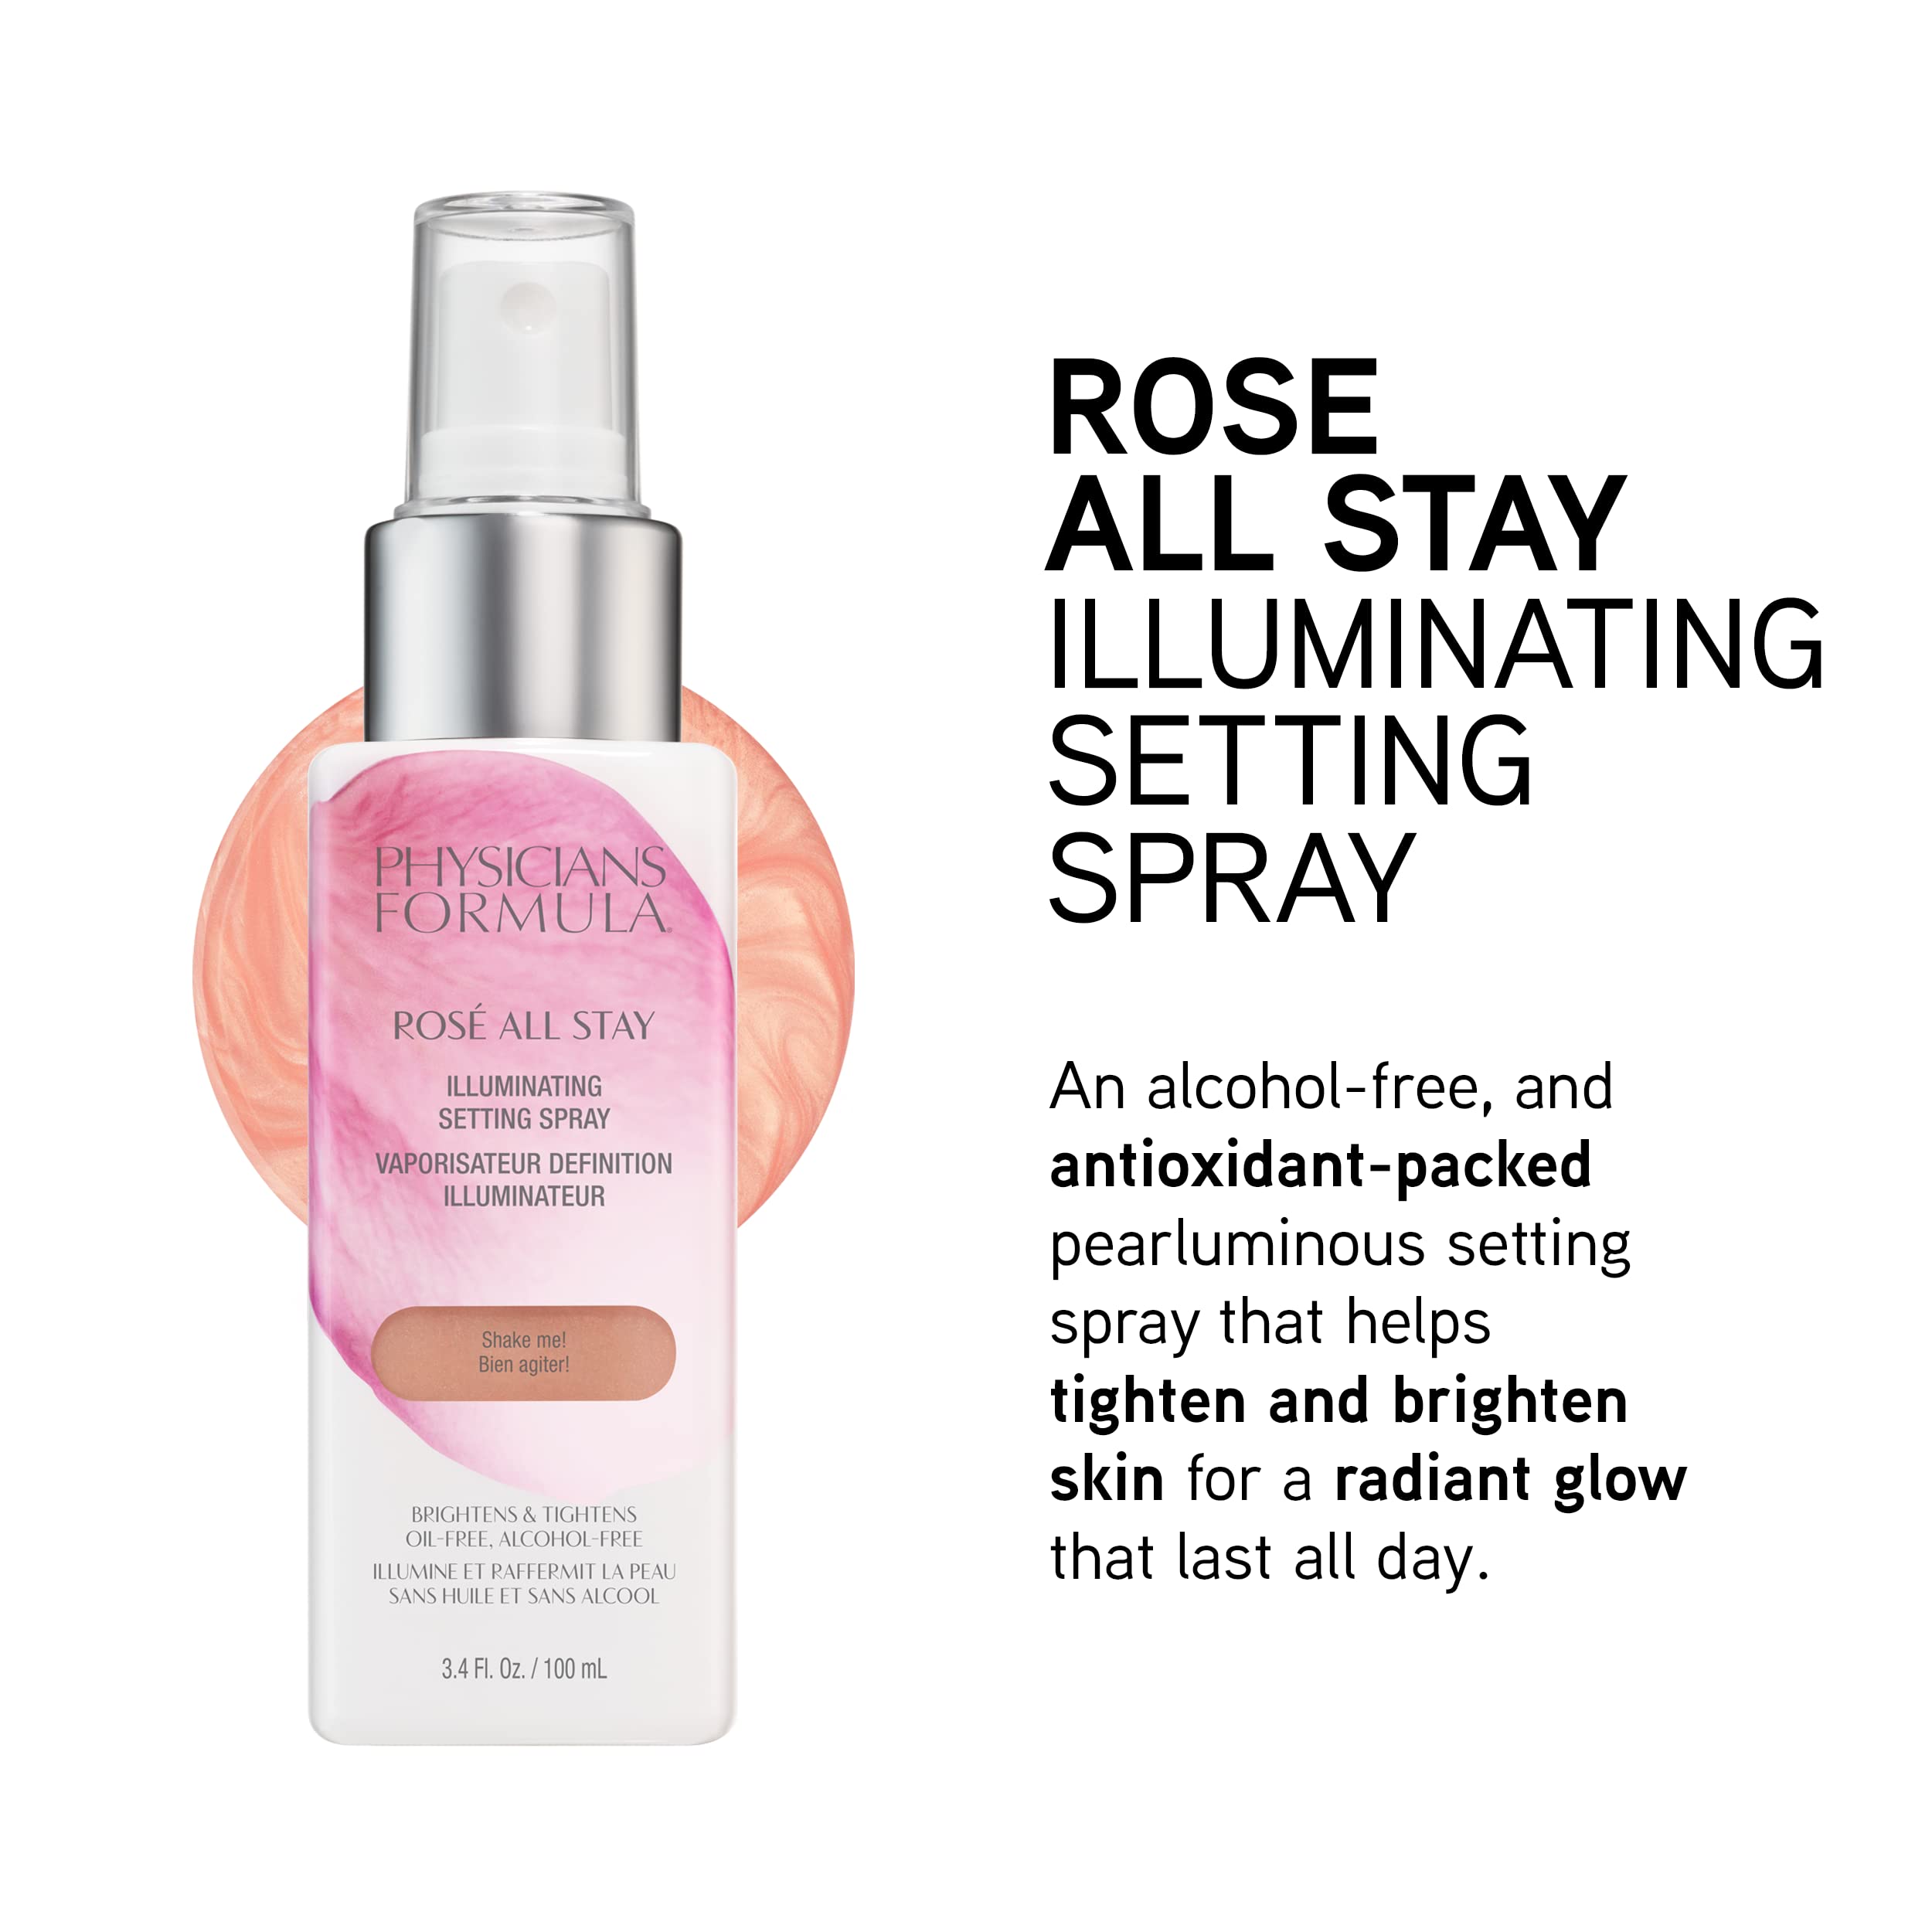 Physicians Formula Rosé All Stay Illuminating Setting Spray For Makeup, Oil-Free, Alcohol-Free, Antioxidants | Dermatologist Tested, Clinicially Tested